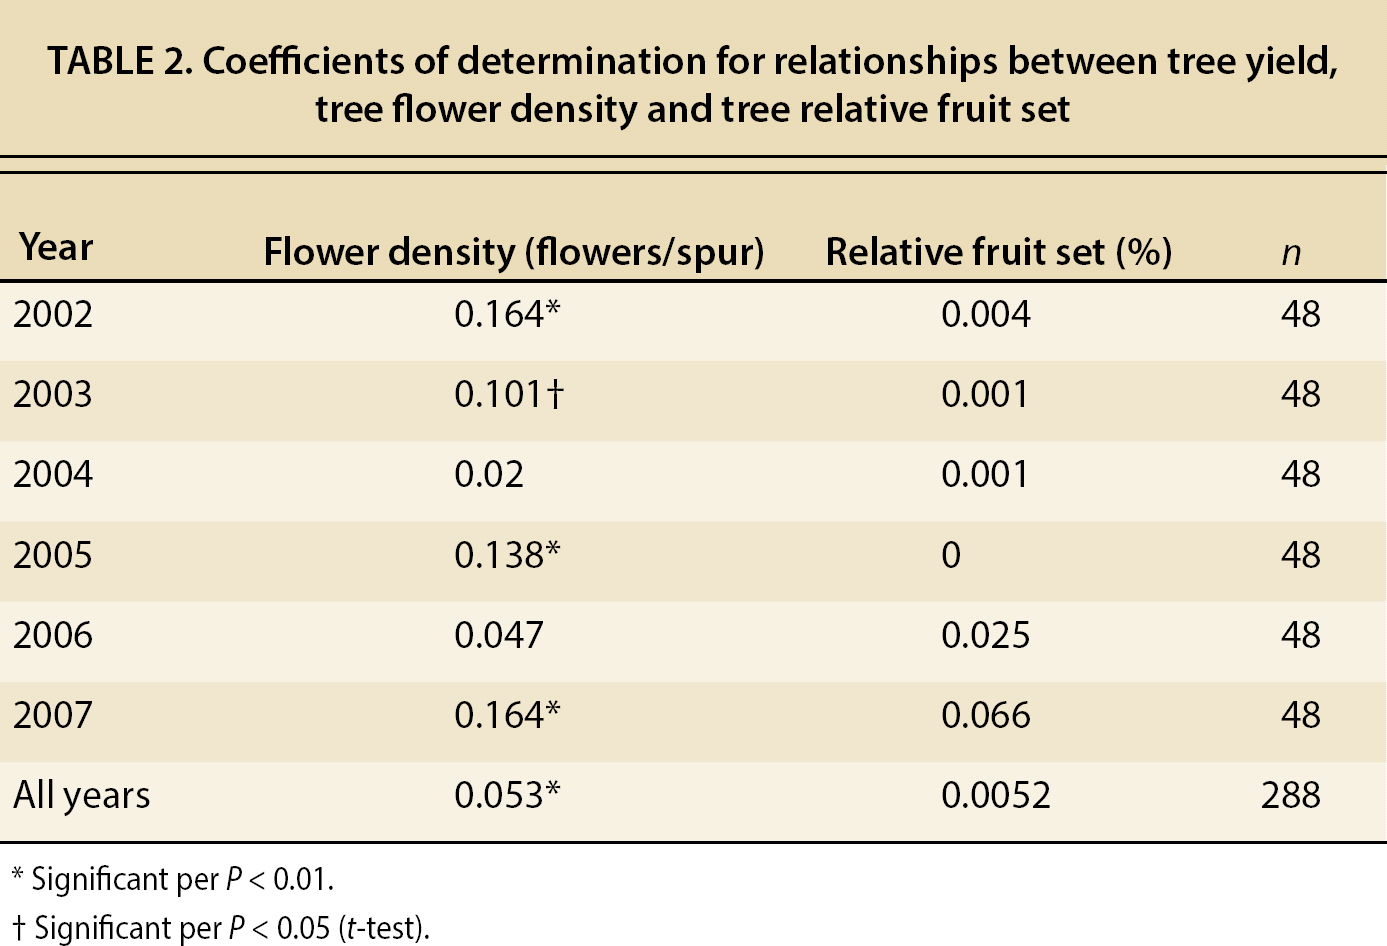 Coefficients of determination for relationships between tree yield, tree flower density and tree relative fruit set